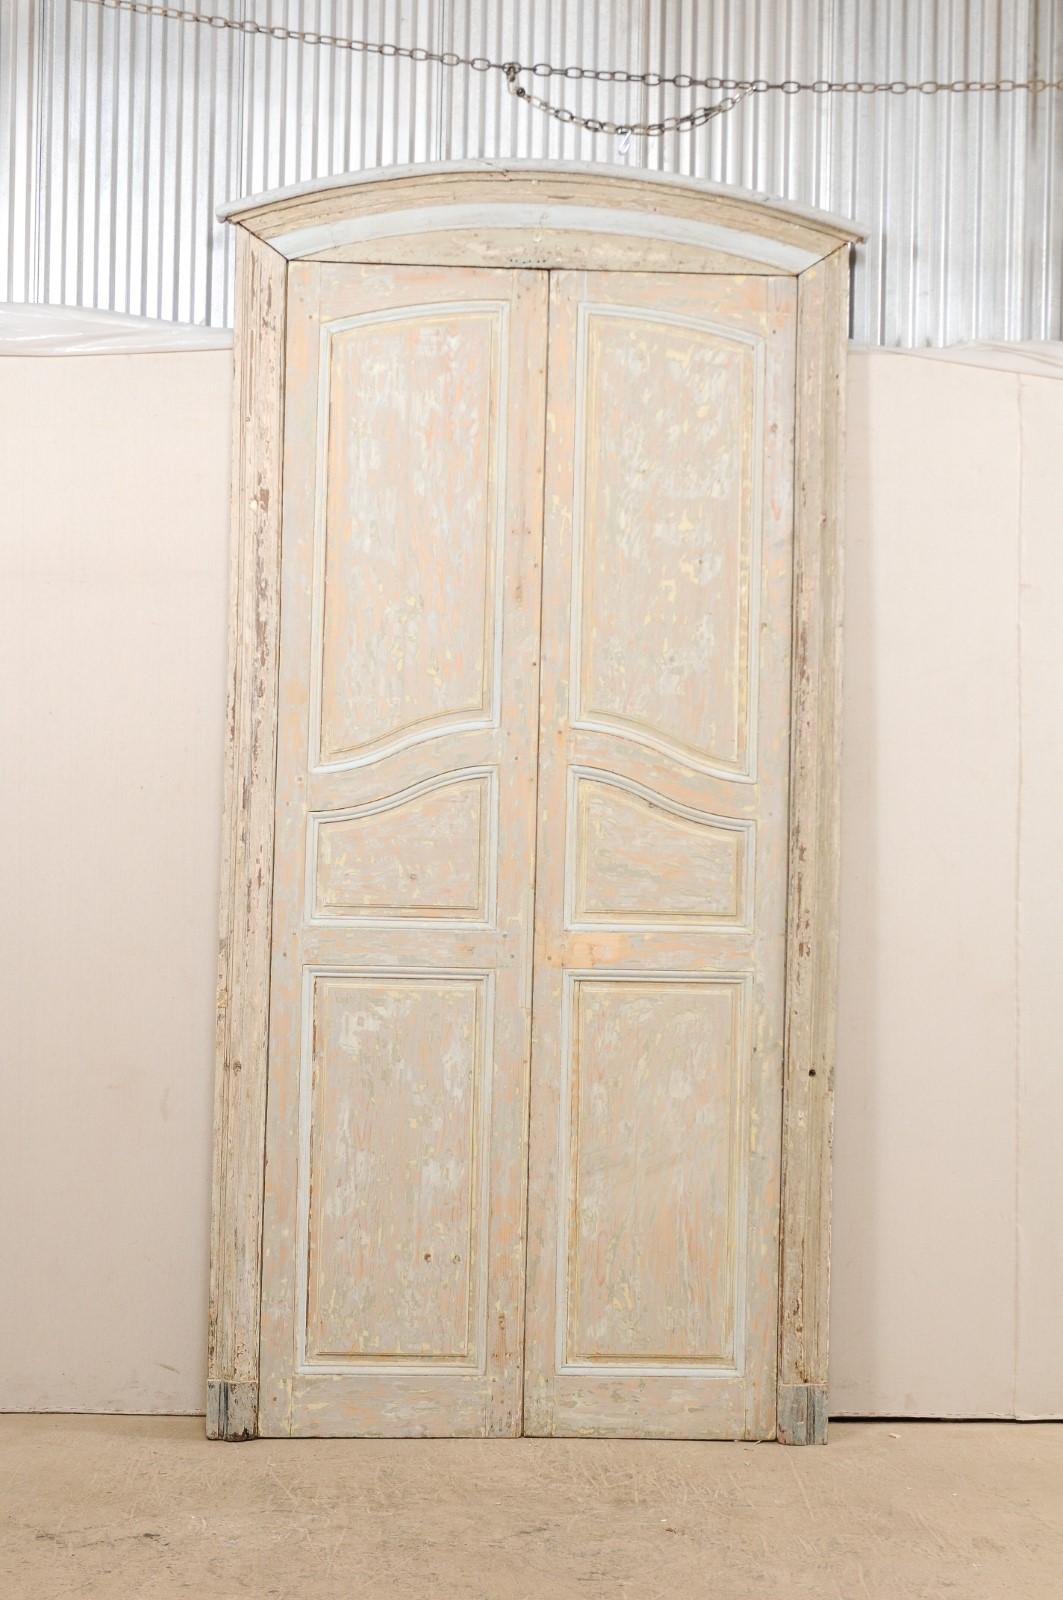 This is an impressive pair of tall 19th century French doors with their original casing and subtle arched crest top. This pair of tall antique doors from France with curvy raised panels and original finish are framed within their original casing,